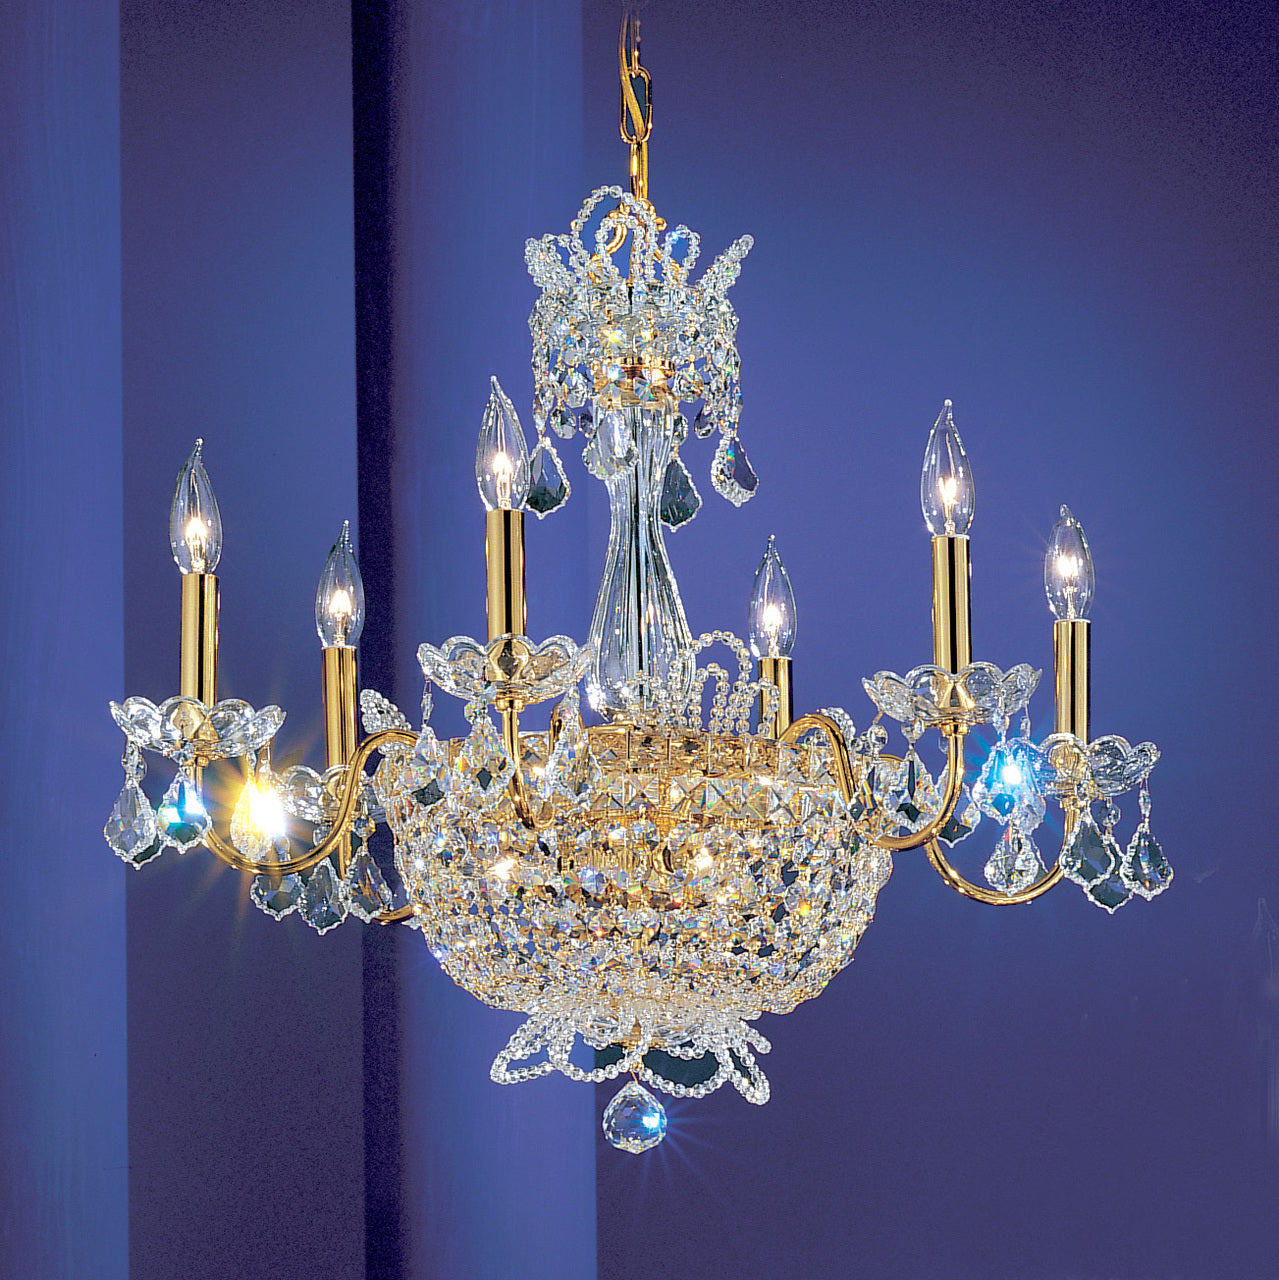 Classic Lighting 69786 GP SC Crown Jewels Crystal Chandelier in Gold